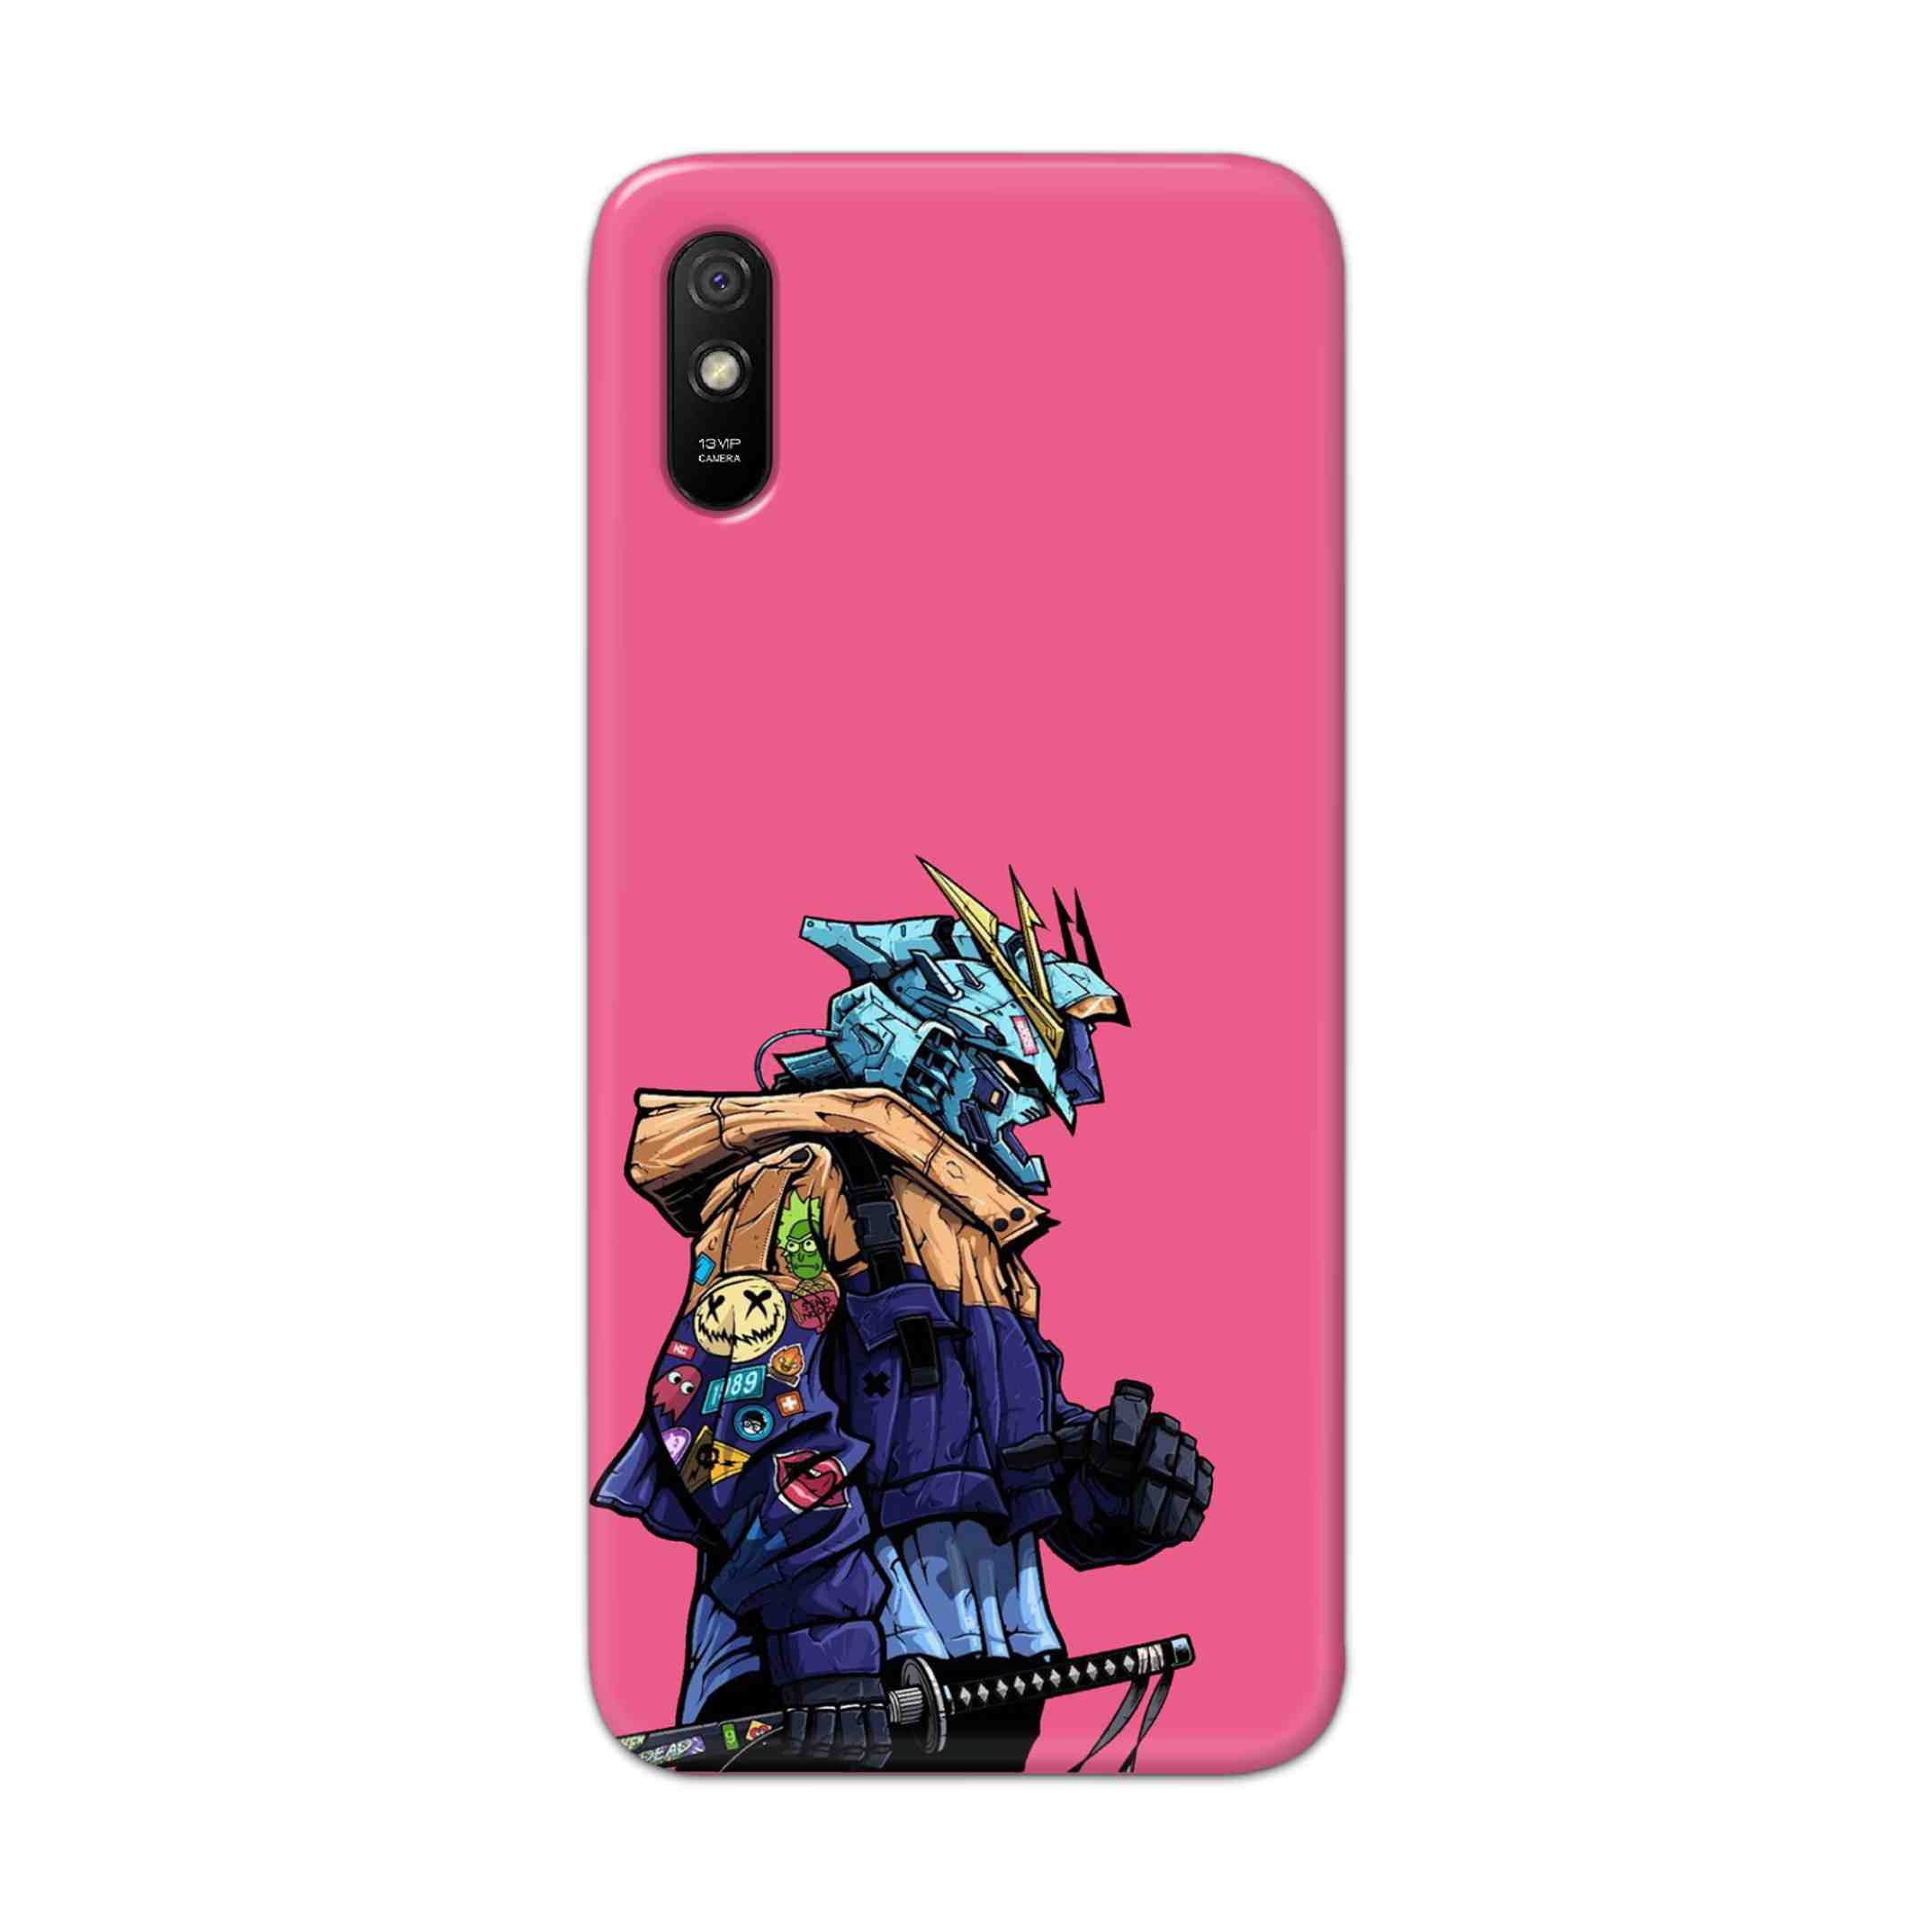 Buy Sword Man Hard Back Mobile Phone Case Cover For Redmi 9A Online